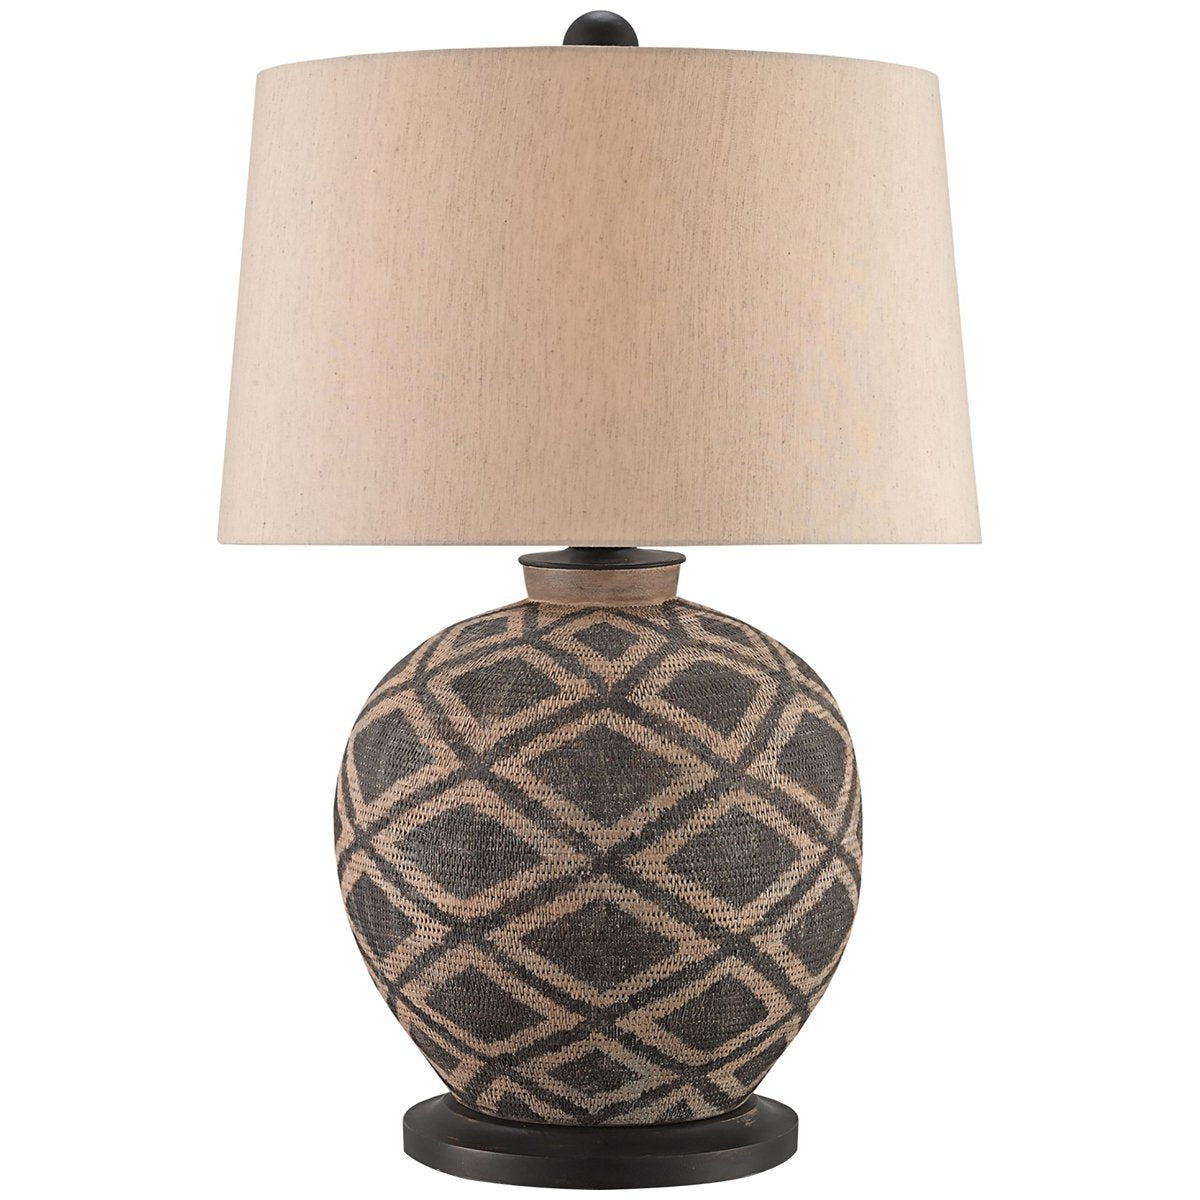 Currey and Company Afrikan Table Lamp